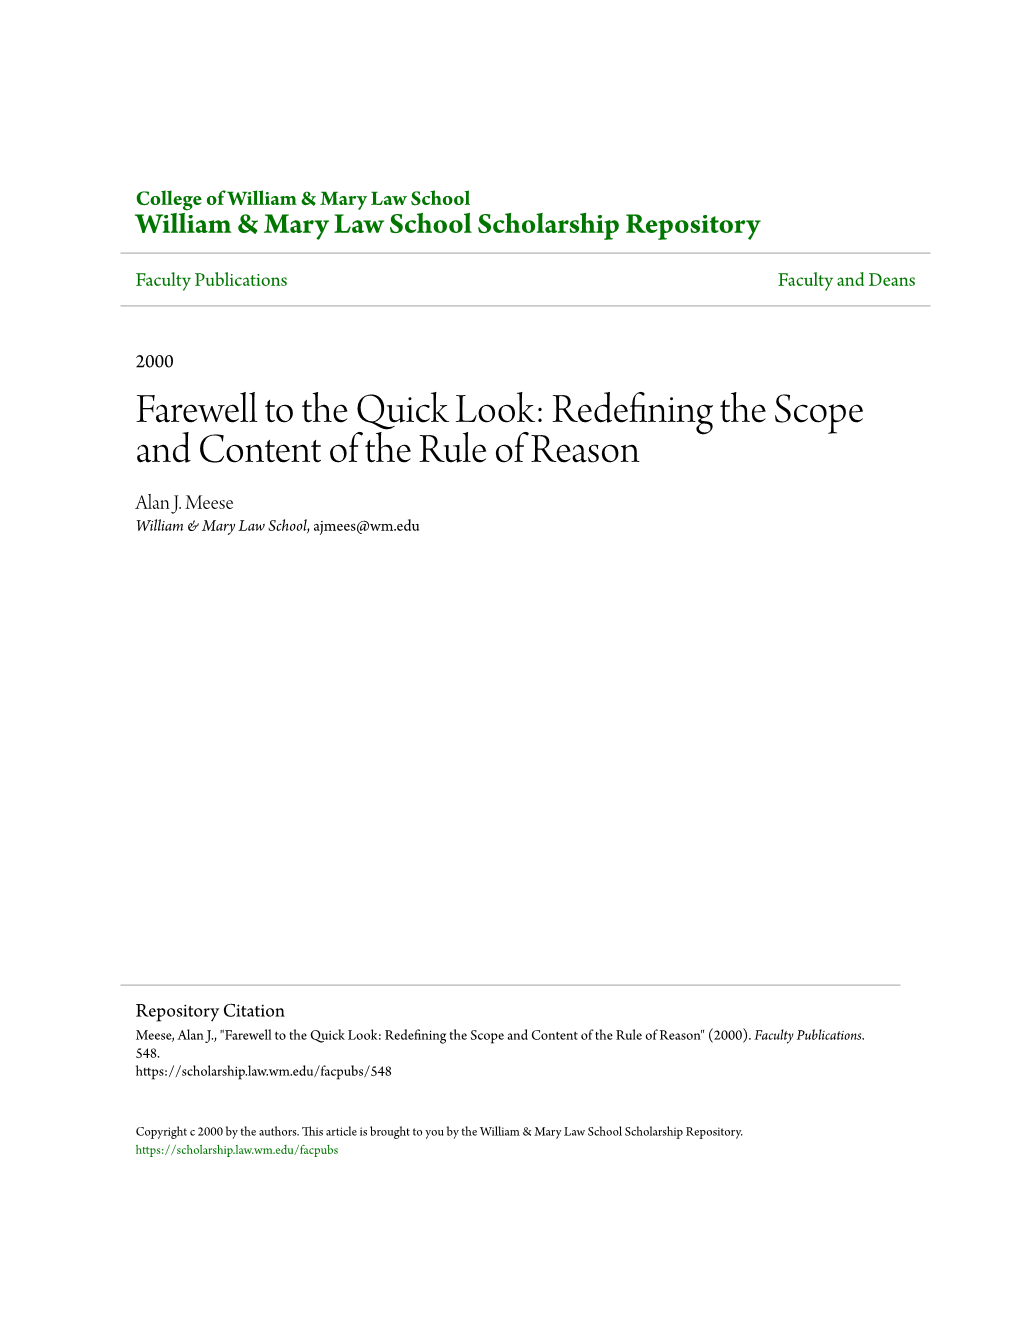 Farewell to the Quick Look: Redefining the Scope and Content of the Rule of Reason Alan J